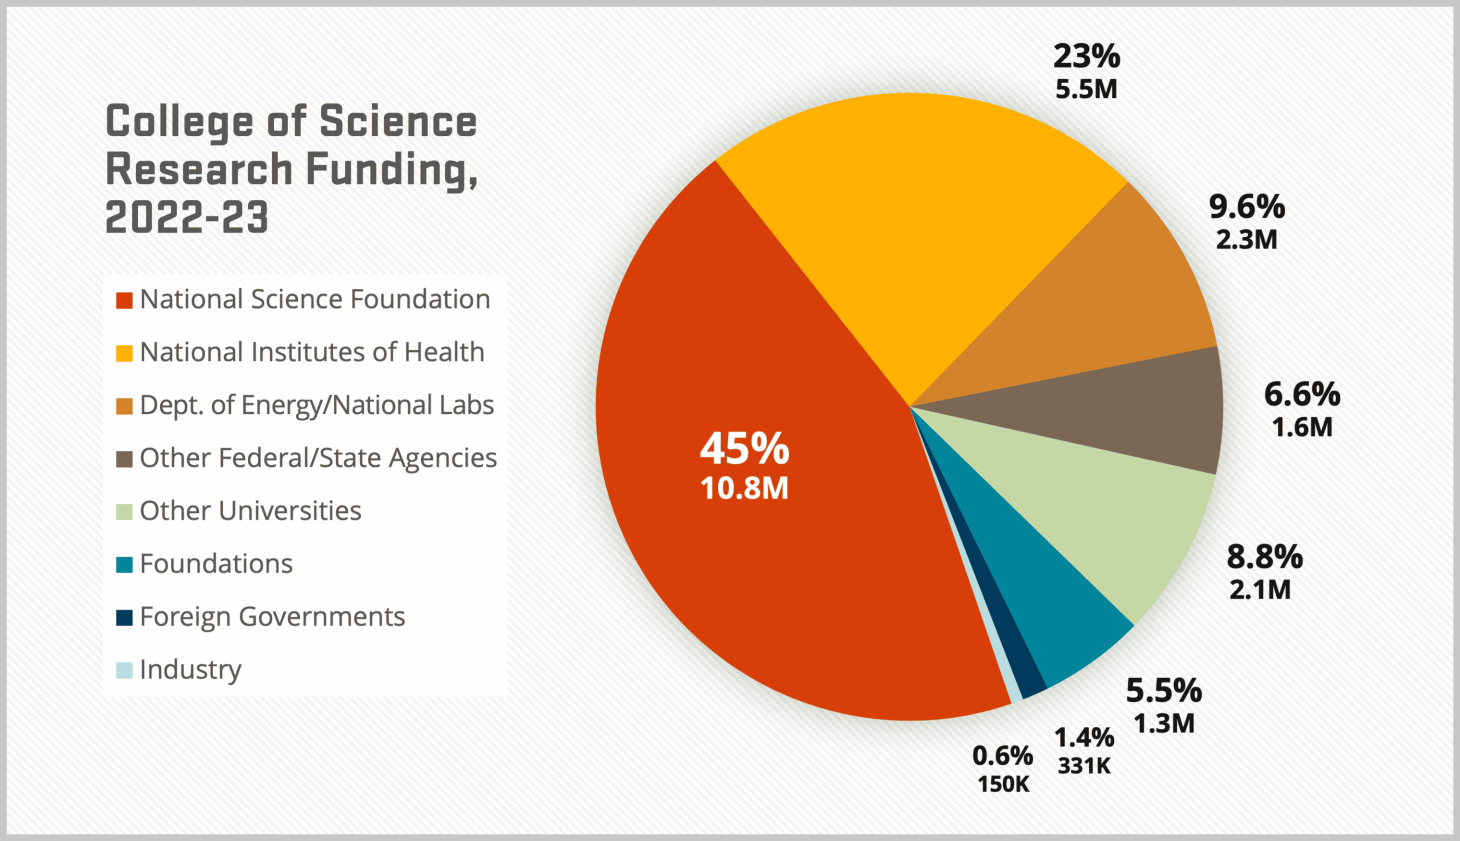 A pie chart representing the breakdown of research funding sources in the fiscal year 2022-2023. Detail is provided in the caption.